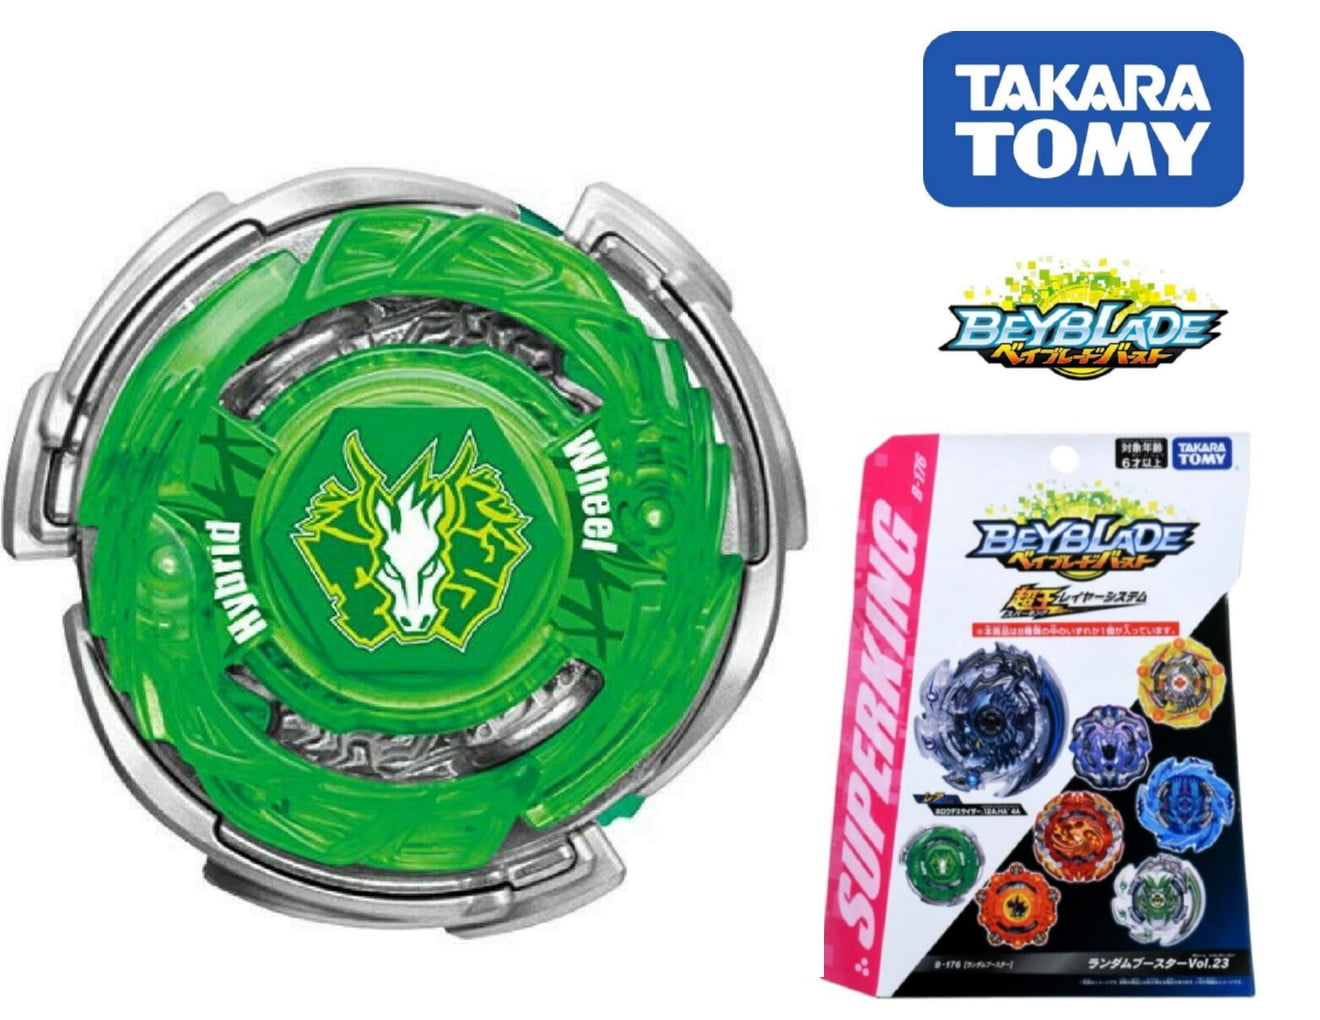 FAST SHIPPING Takara Tomy Beyblade Burst METAL Storm B-01 Without Launcher 